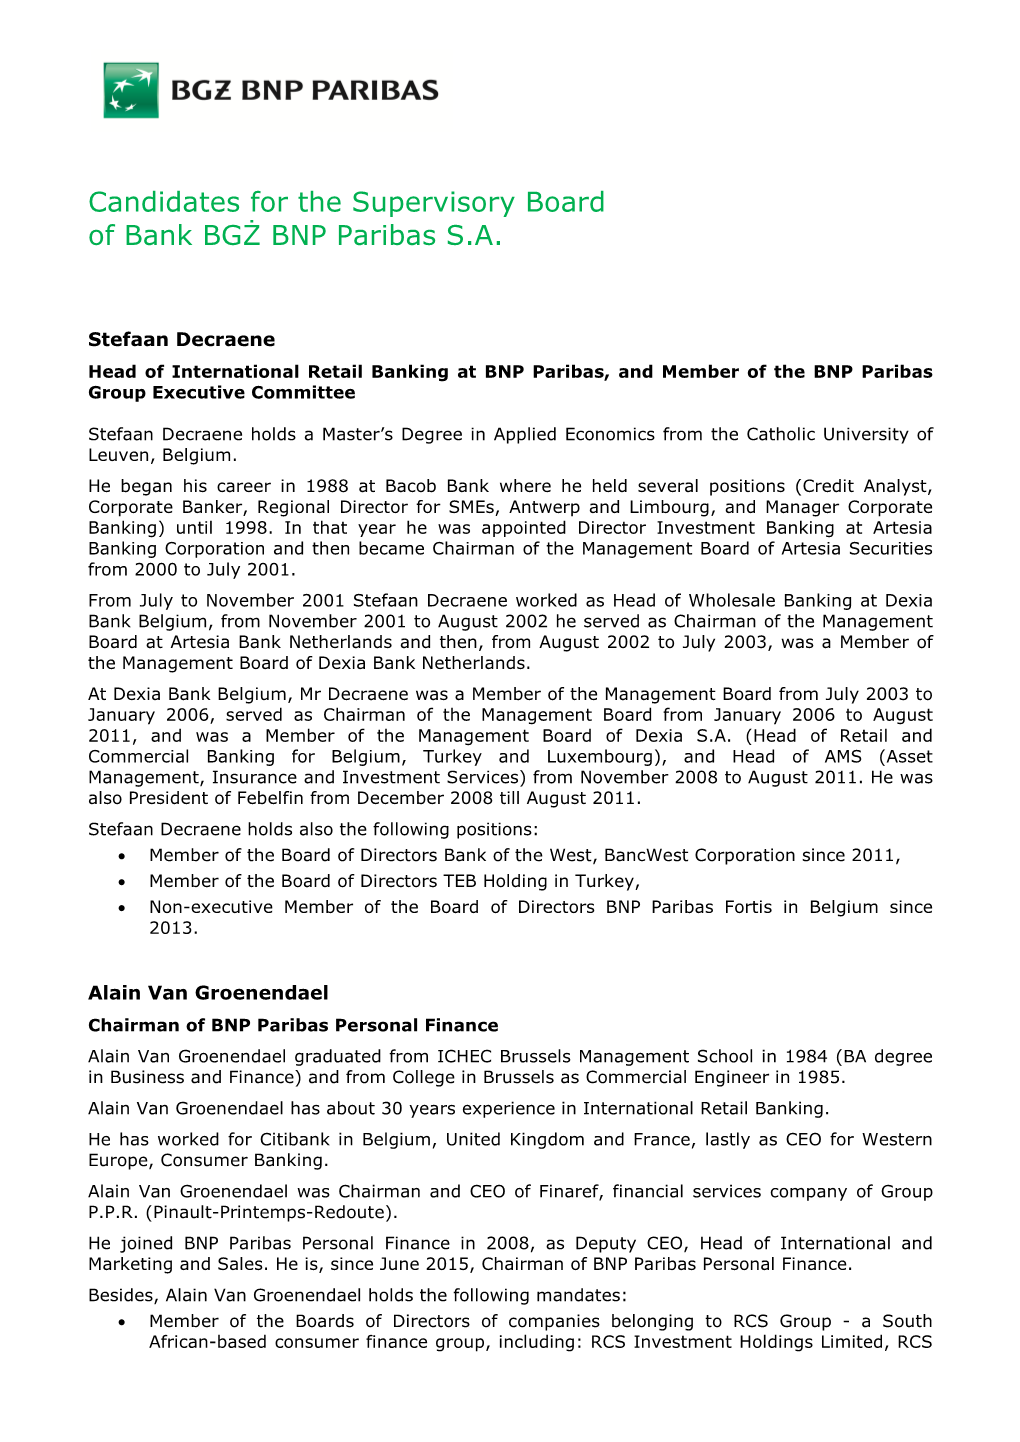 Candidates for the Supervisory Board of Bank BGŻ BNP Paribas S.A